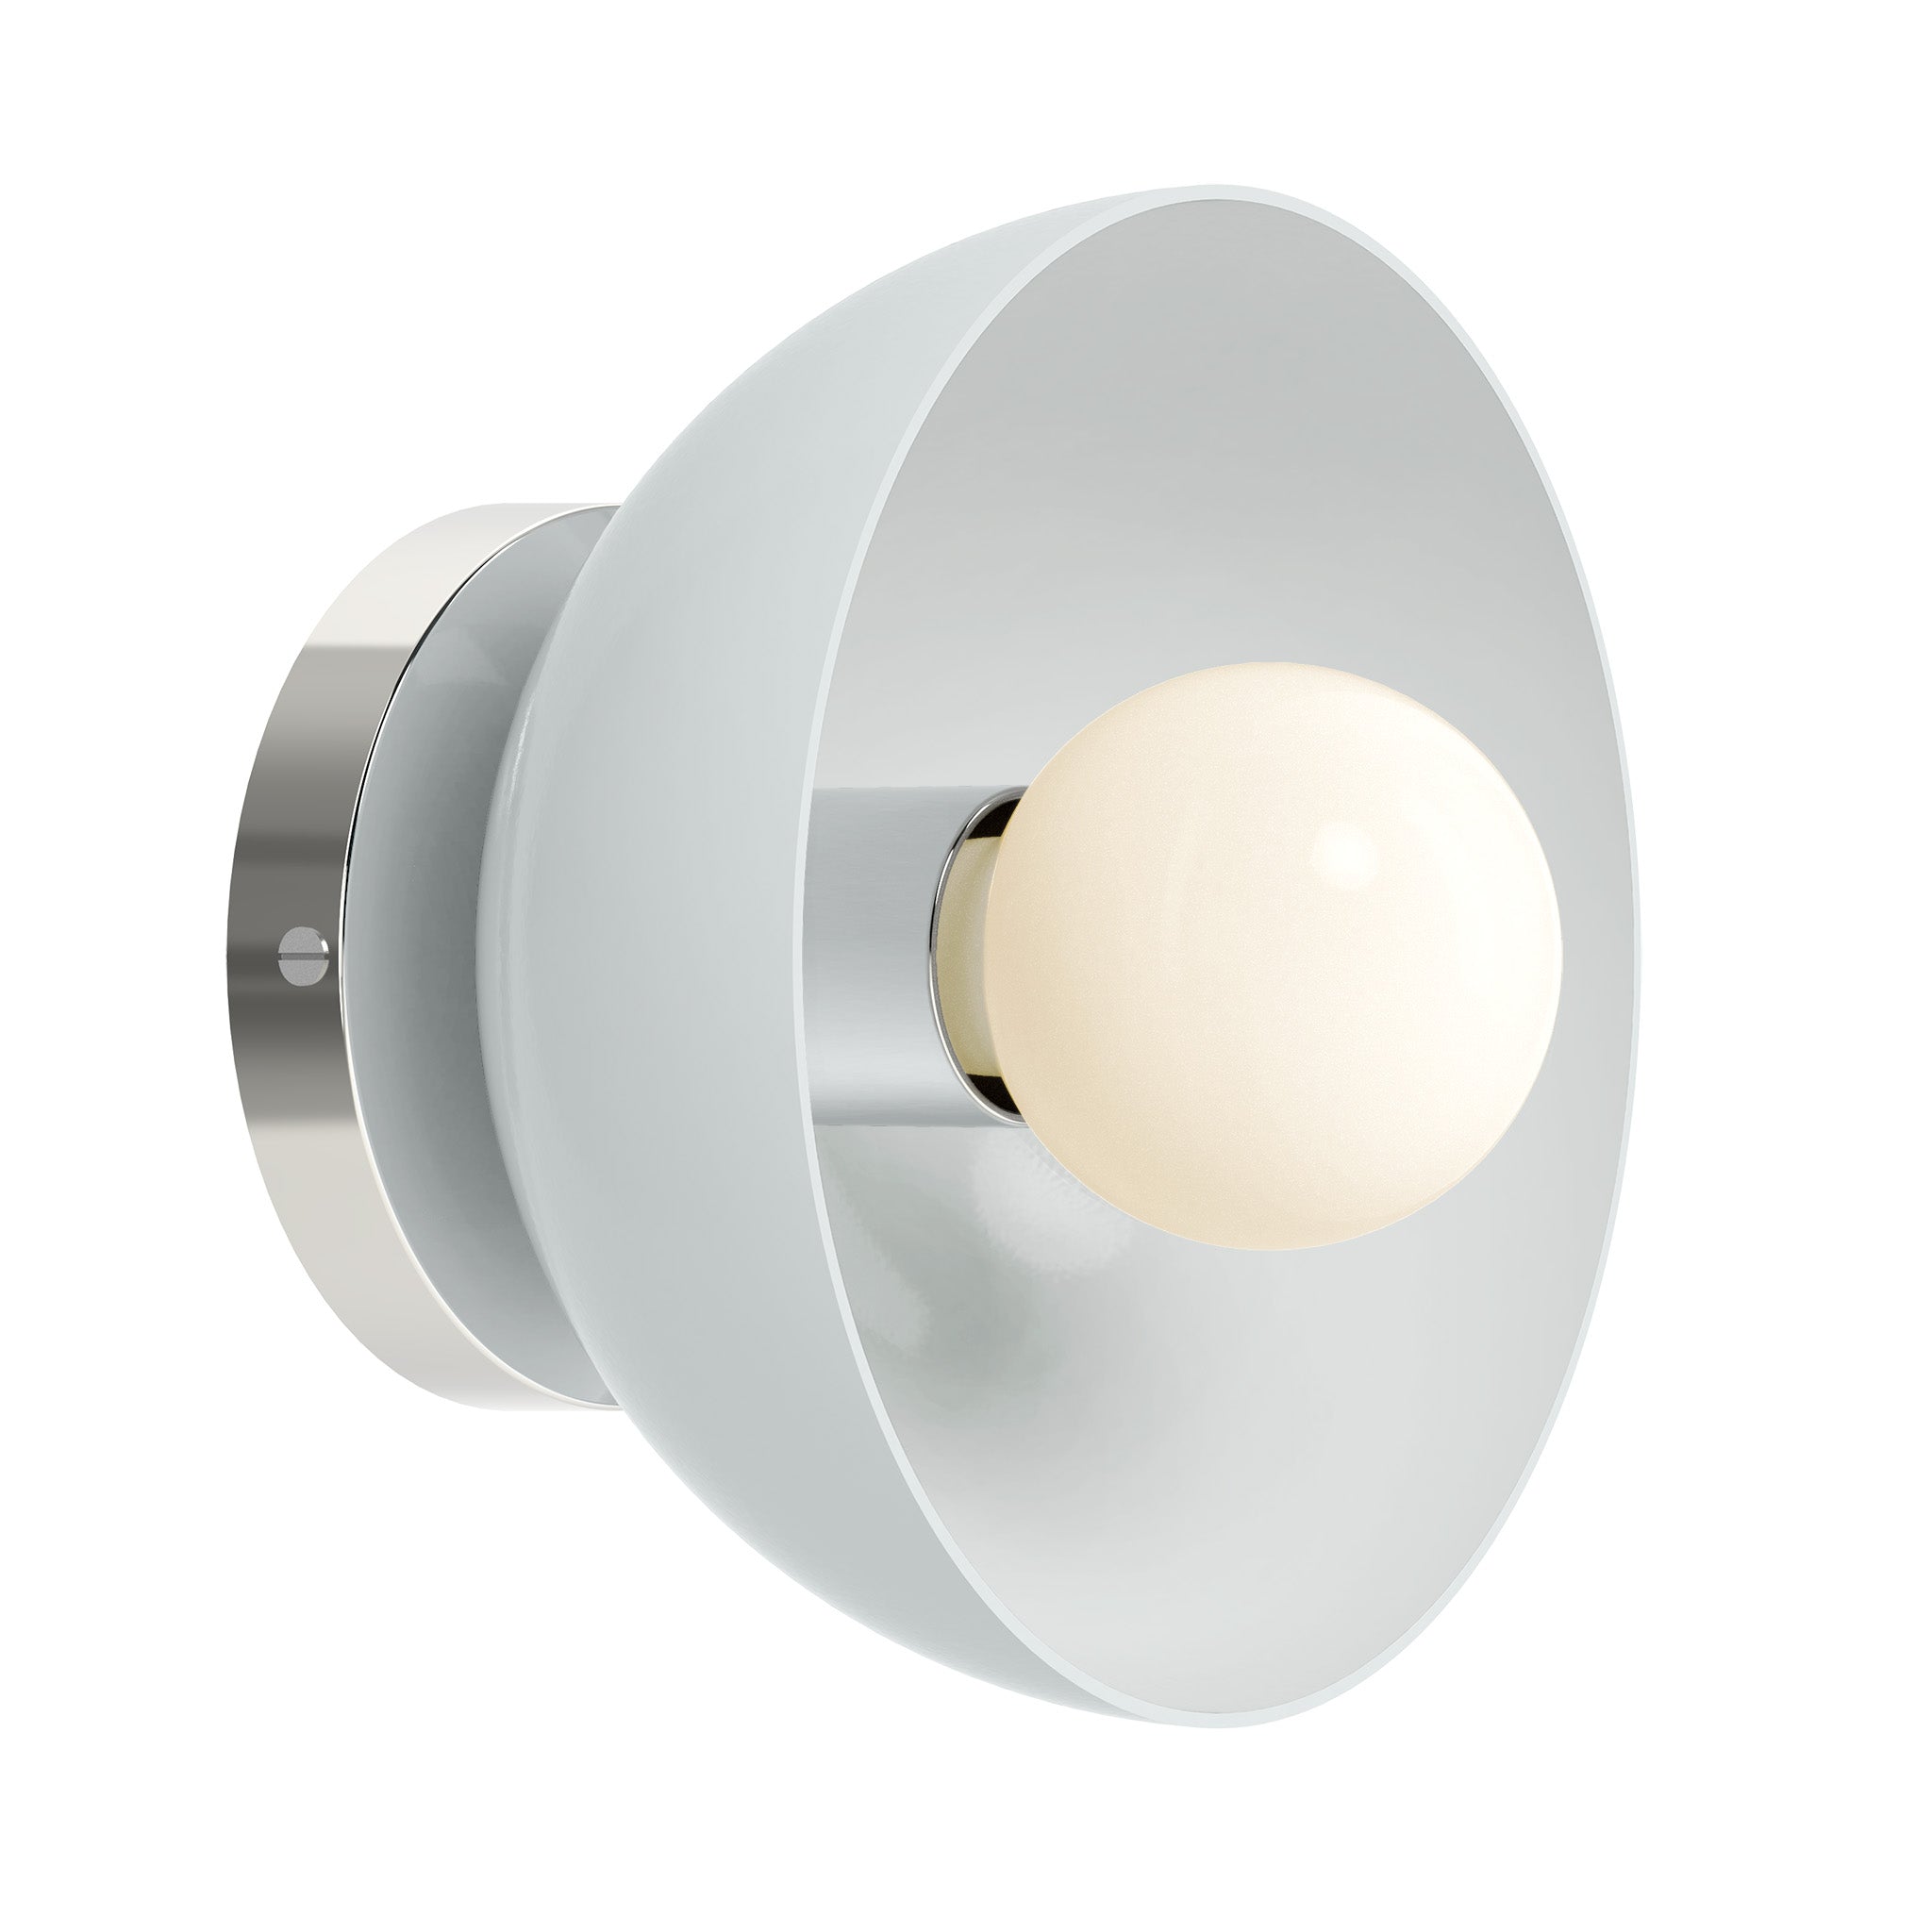 Nickel and bone color Hemi sconce 8" Dutton Brown lighting